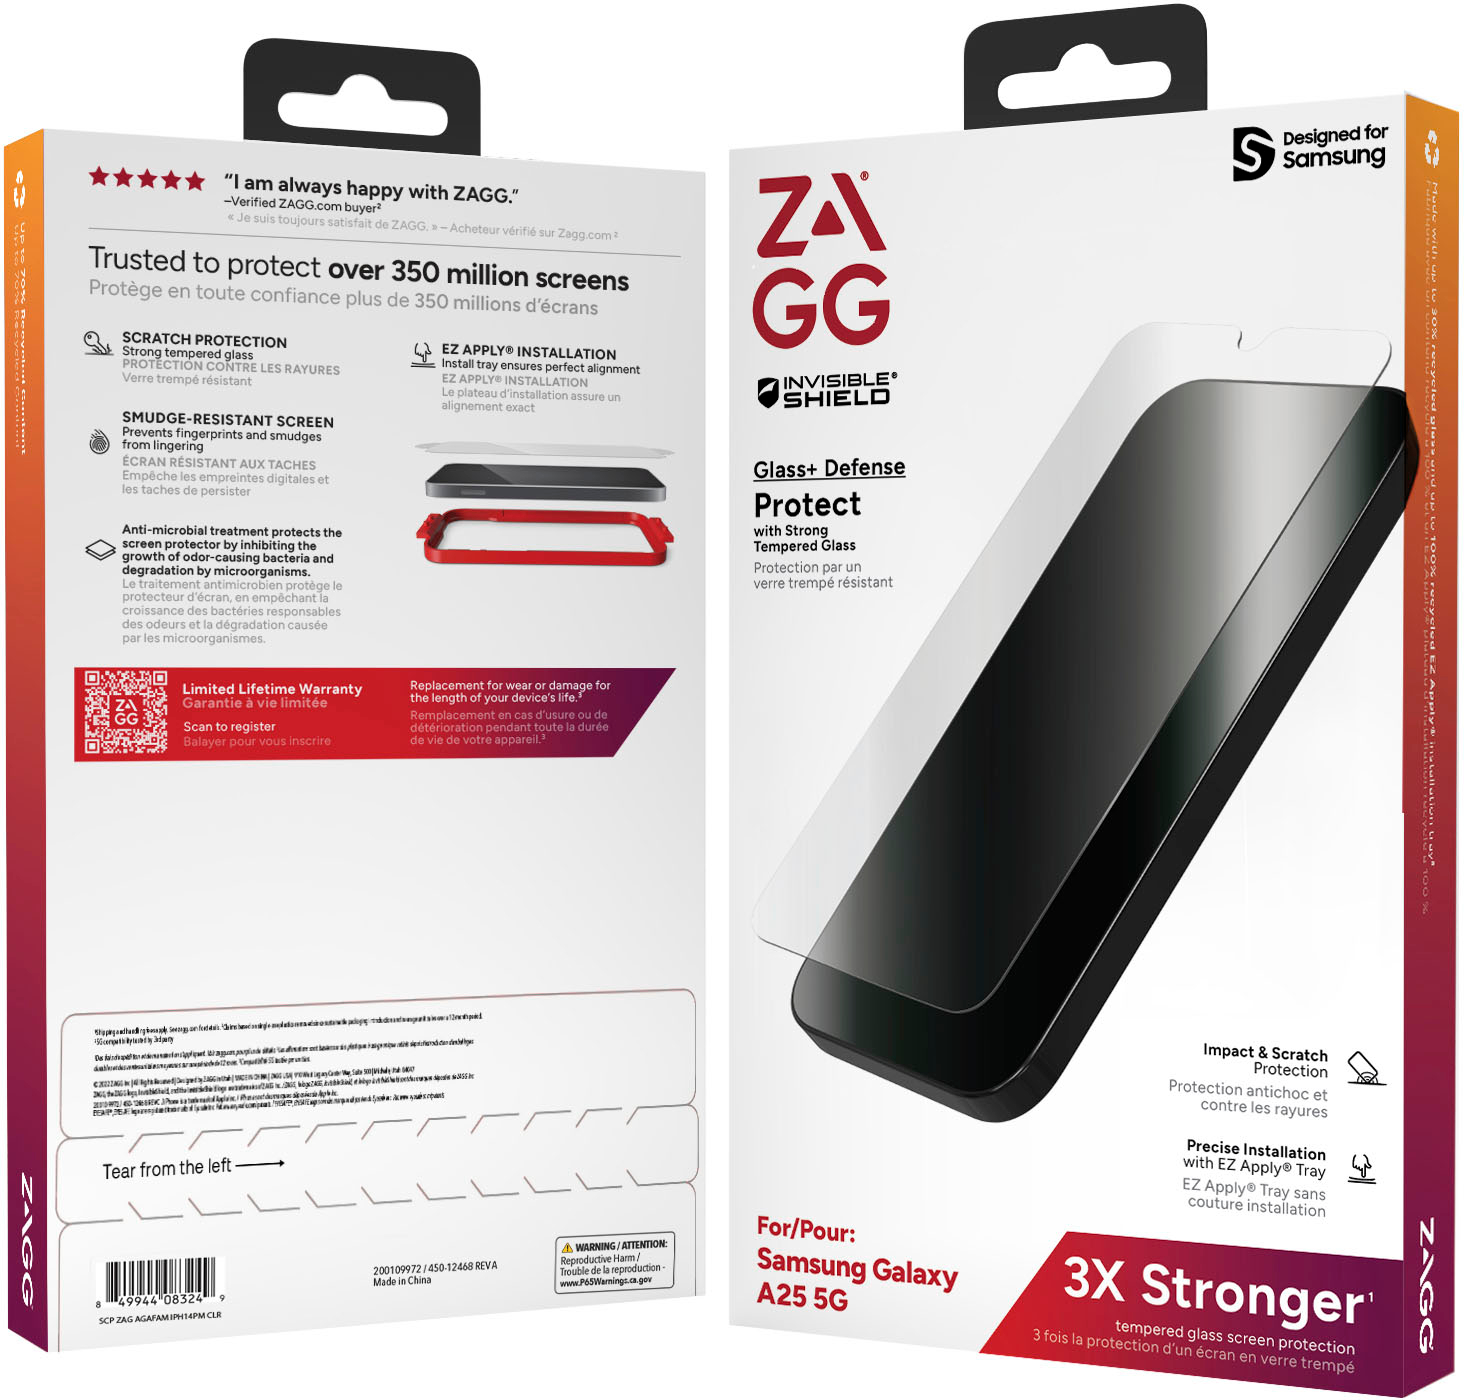 ZAGG InvisibleShield Glass+ Defense Screen Protector for Samsung Galaxy A25  5G Clear 200112281 - Best Buy